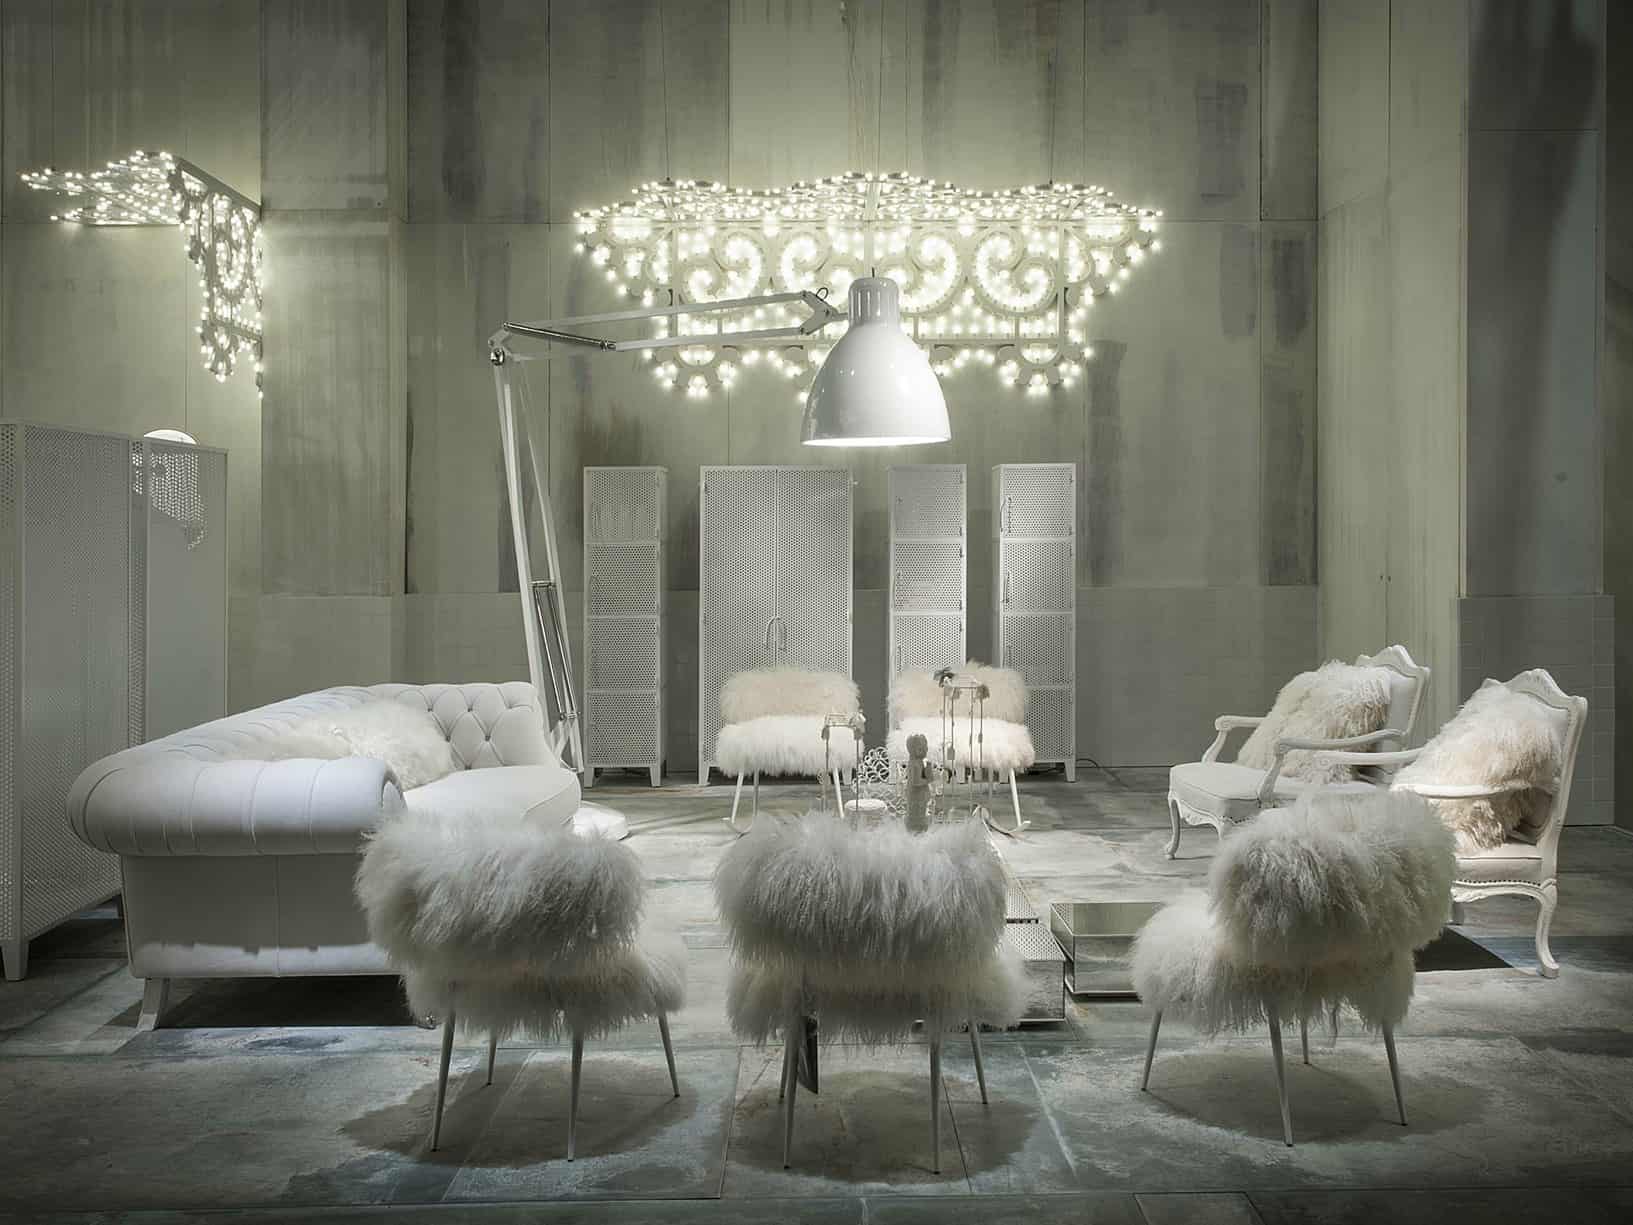 Paola Navone Designs White Fairy Tale like Interiors to Present Latest Furniture by Baxter